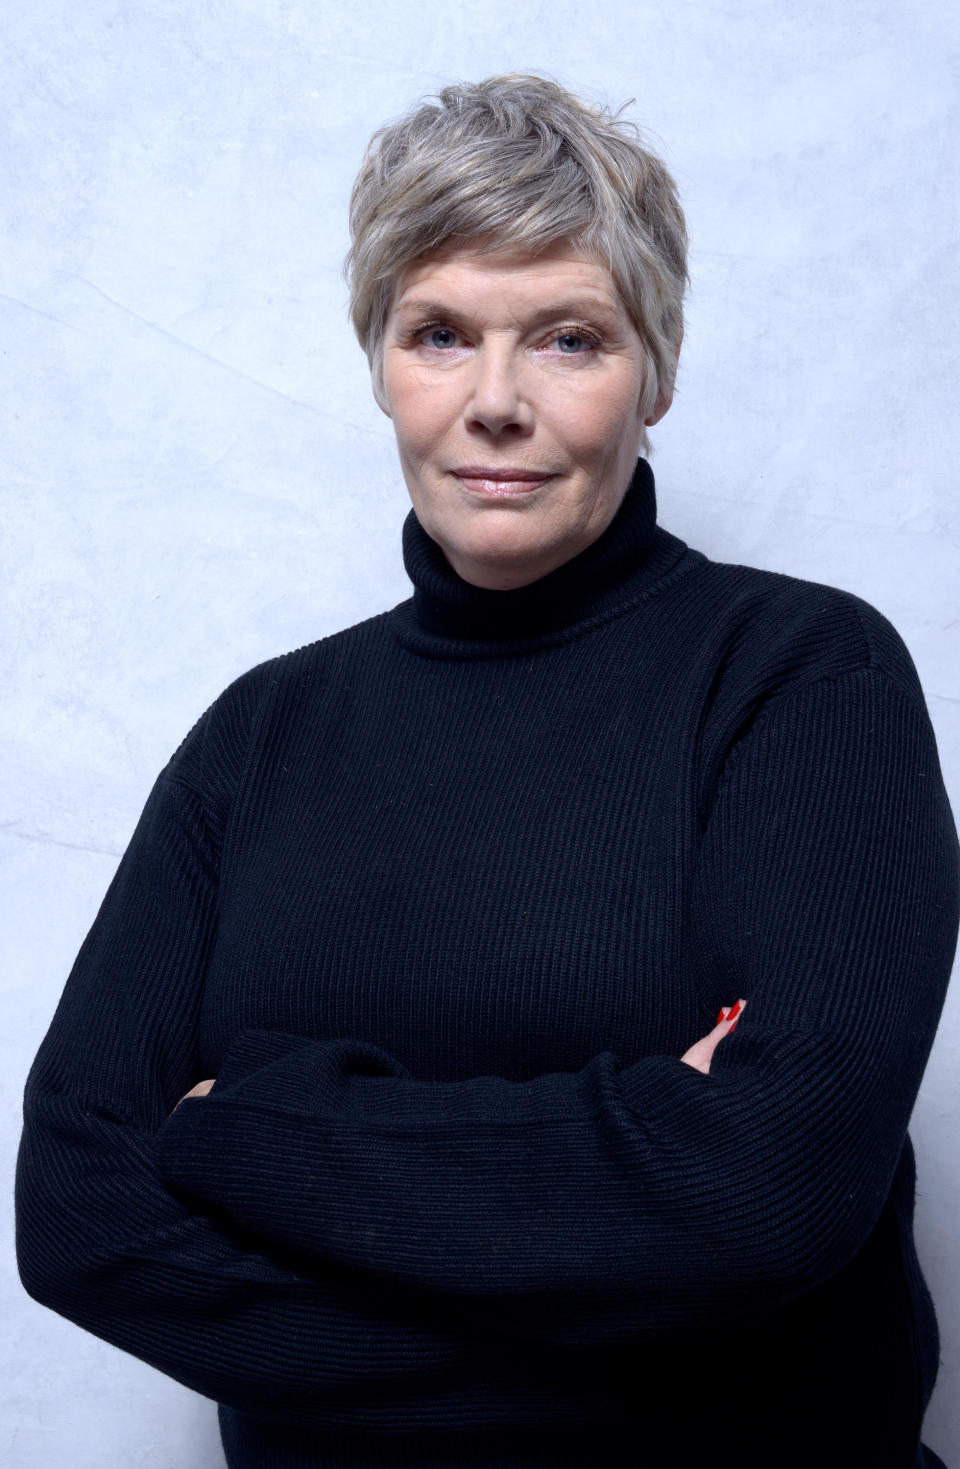 PARK CITY, UT - JANUARY 18:  Actress Kelly McGillis poses for a portrait during the 2013 Sundance Film Festival at the WireImage Portrait Studio at Village At The Lift on January 18, 2013 in Park City, Utah.  (Photo by Jeff Vespa/WireImage)